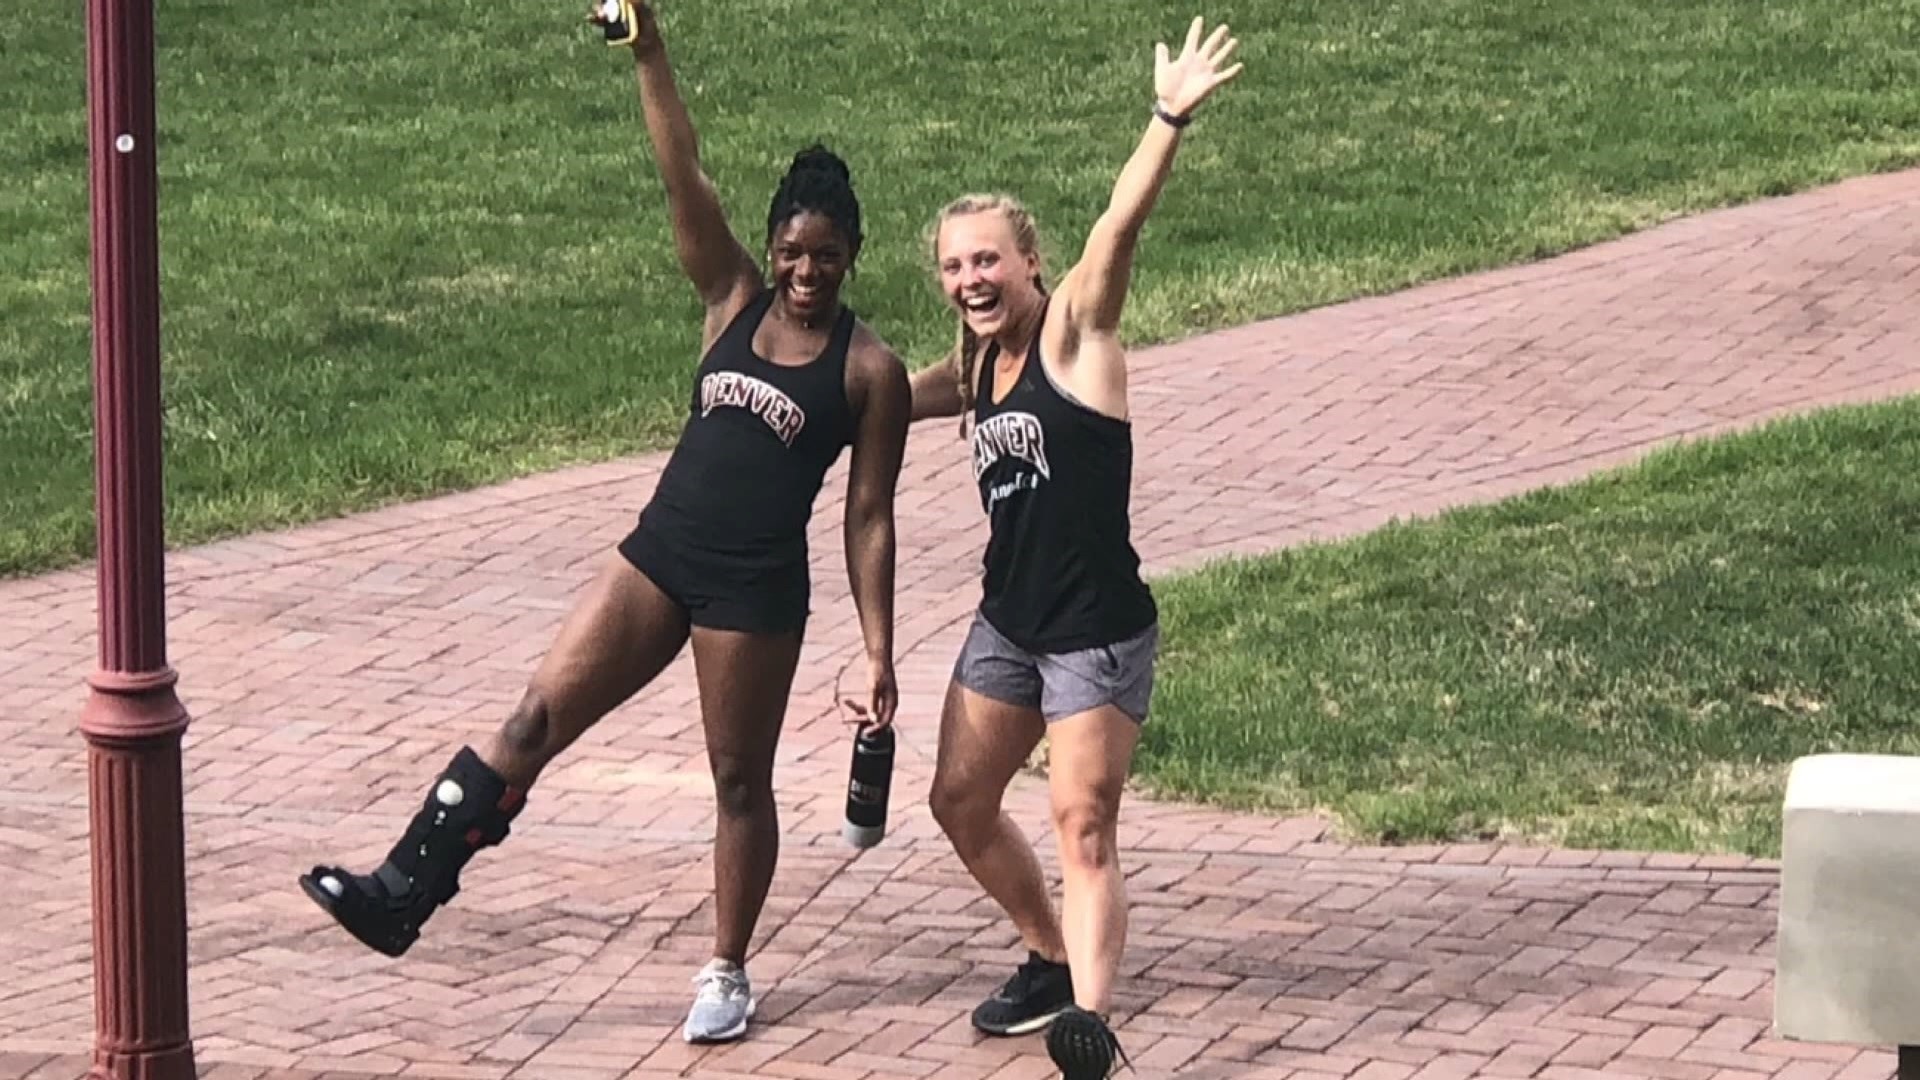 In February of 2020 Lynnzee Brown and Mia Sundstrom both suffered season-ending injuries, but they took on the rehab process together and formed an unbreakable bond.